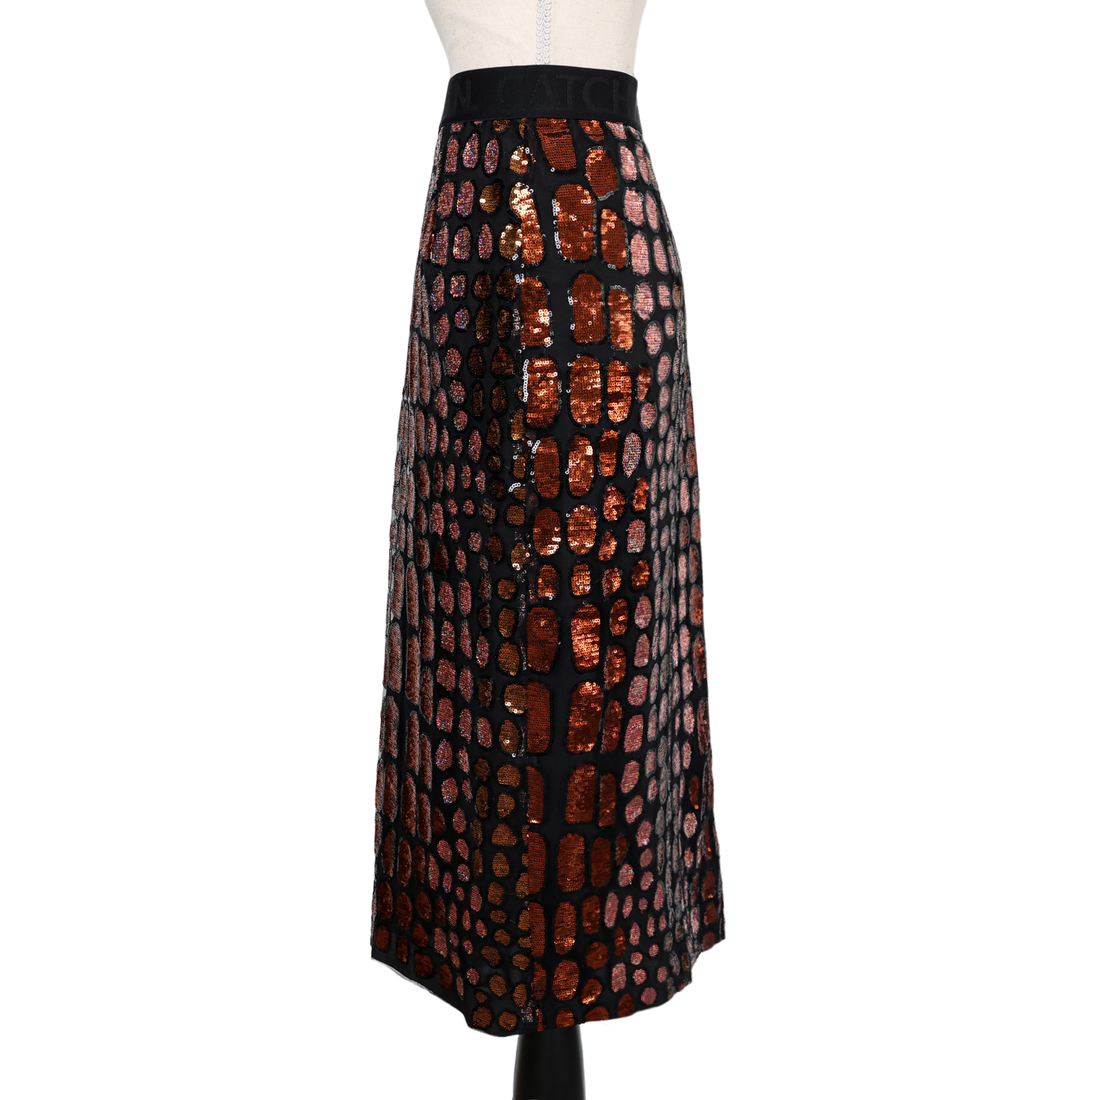 Dorothee Schumacher Lavishly embroidered skirt with sequins